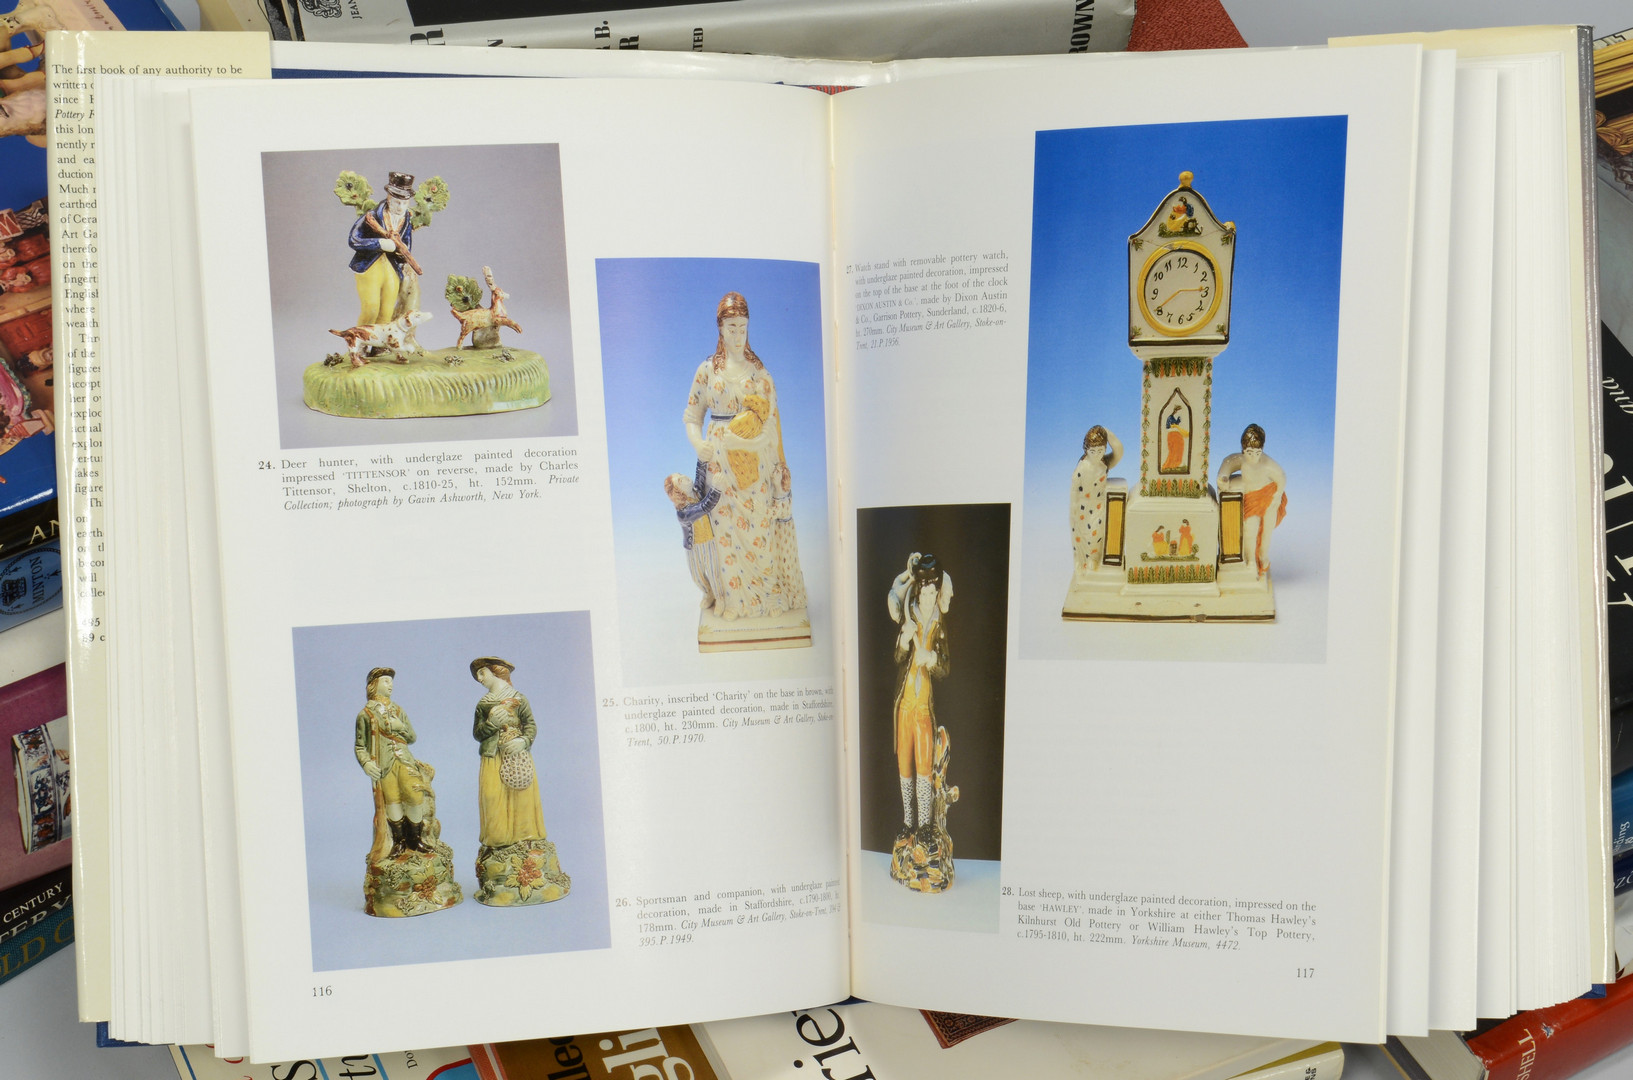 Lot 874: Group of 21 books on Antiques